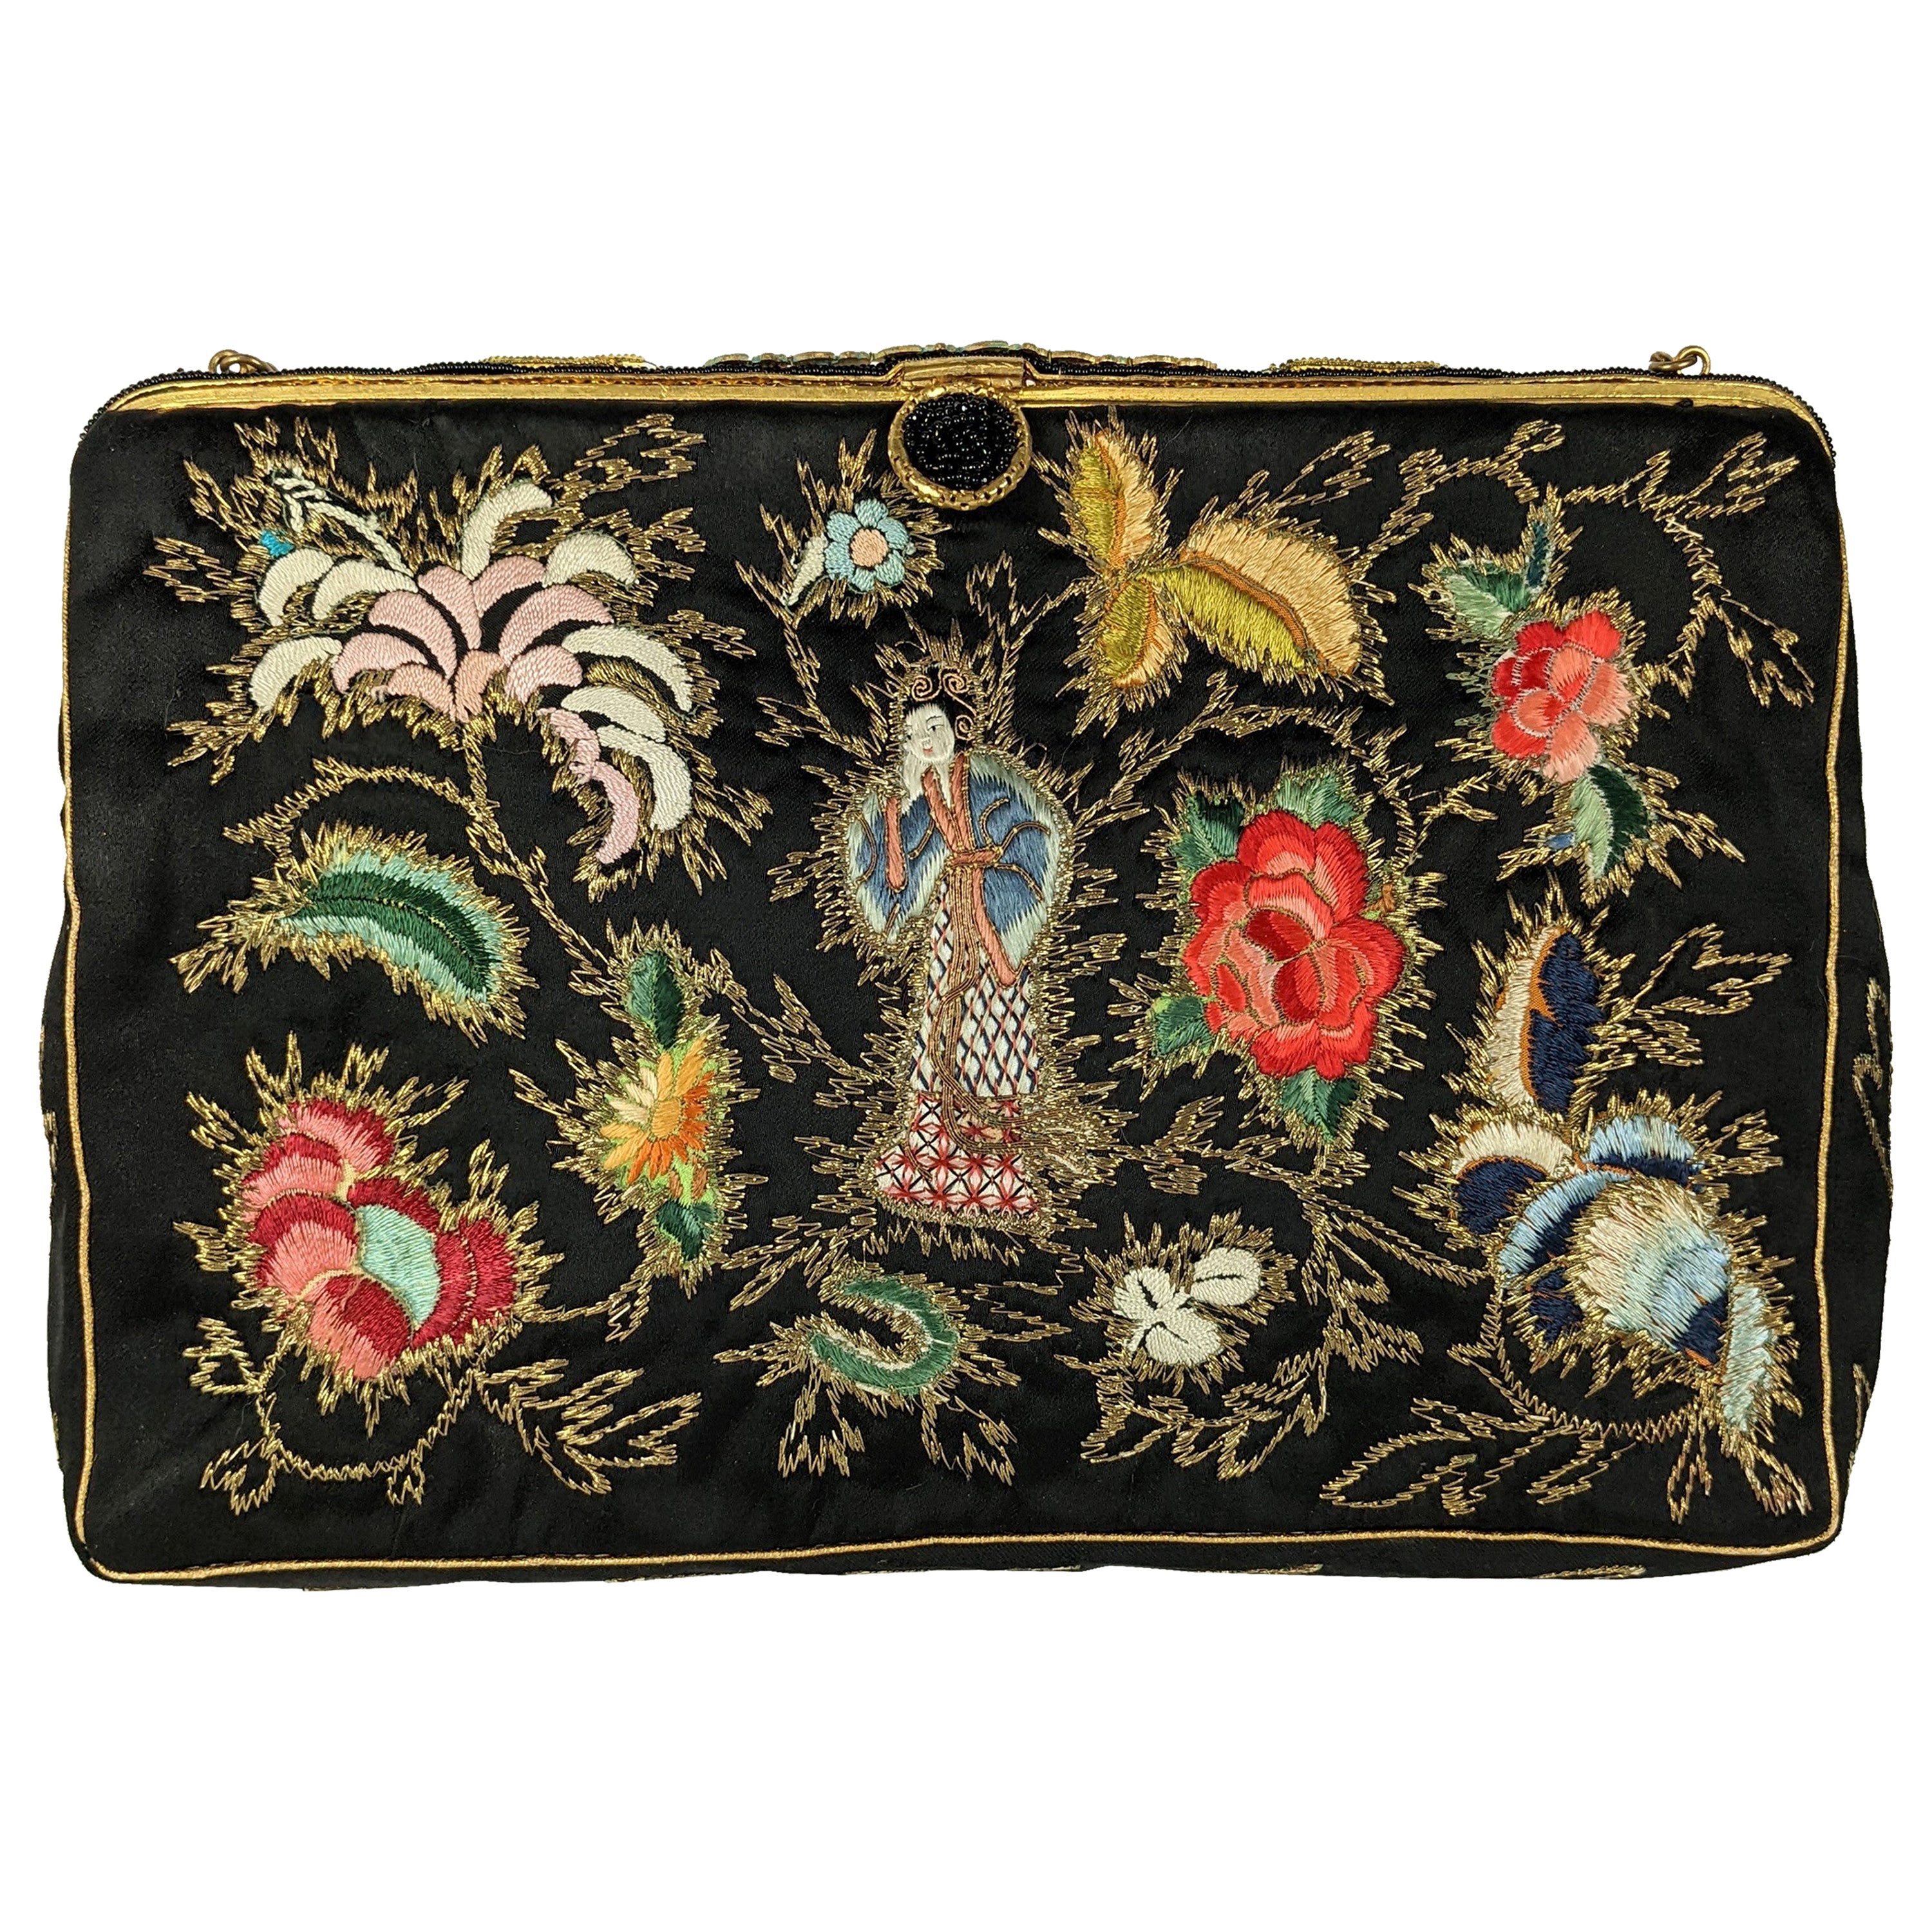 1890s Victorian Black Beaded Pouch with Filigree Frame and Carved ...